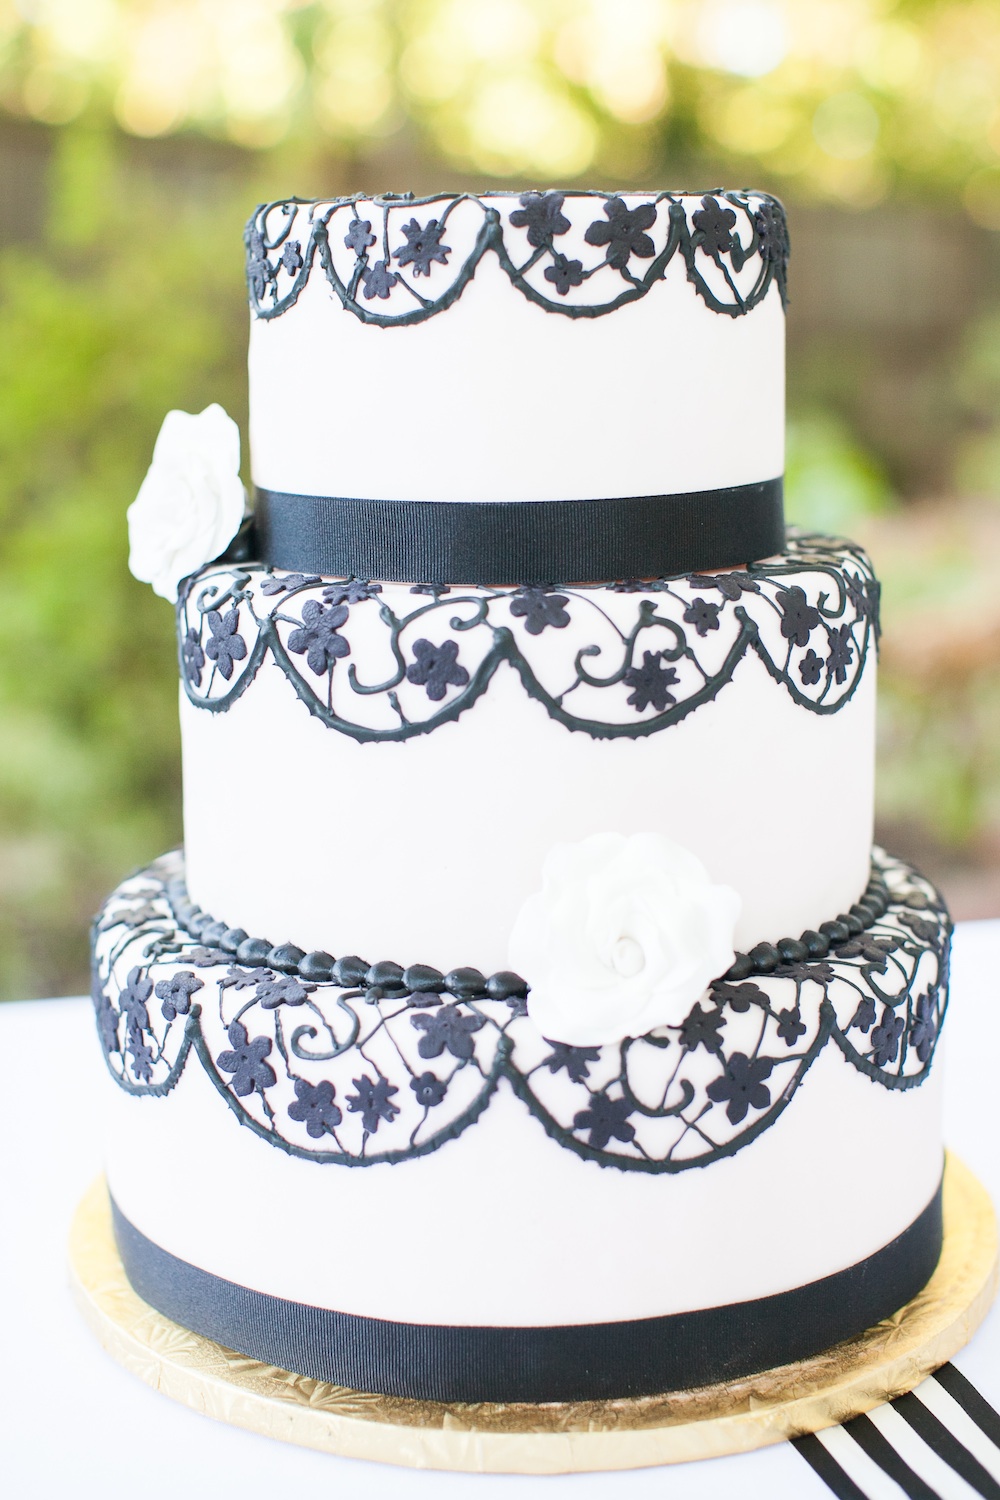  Elegant Halloween Wedding Cake by Lil' Tea's Specialty Desserts / photo by {a}strid Photography 